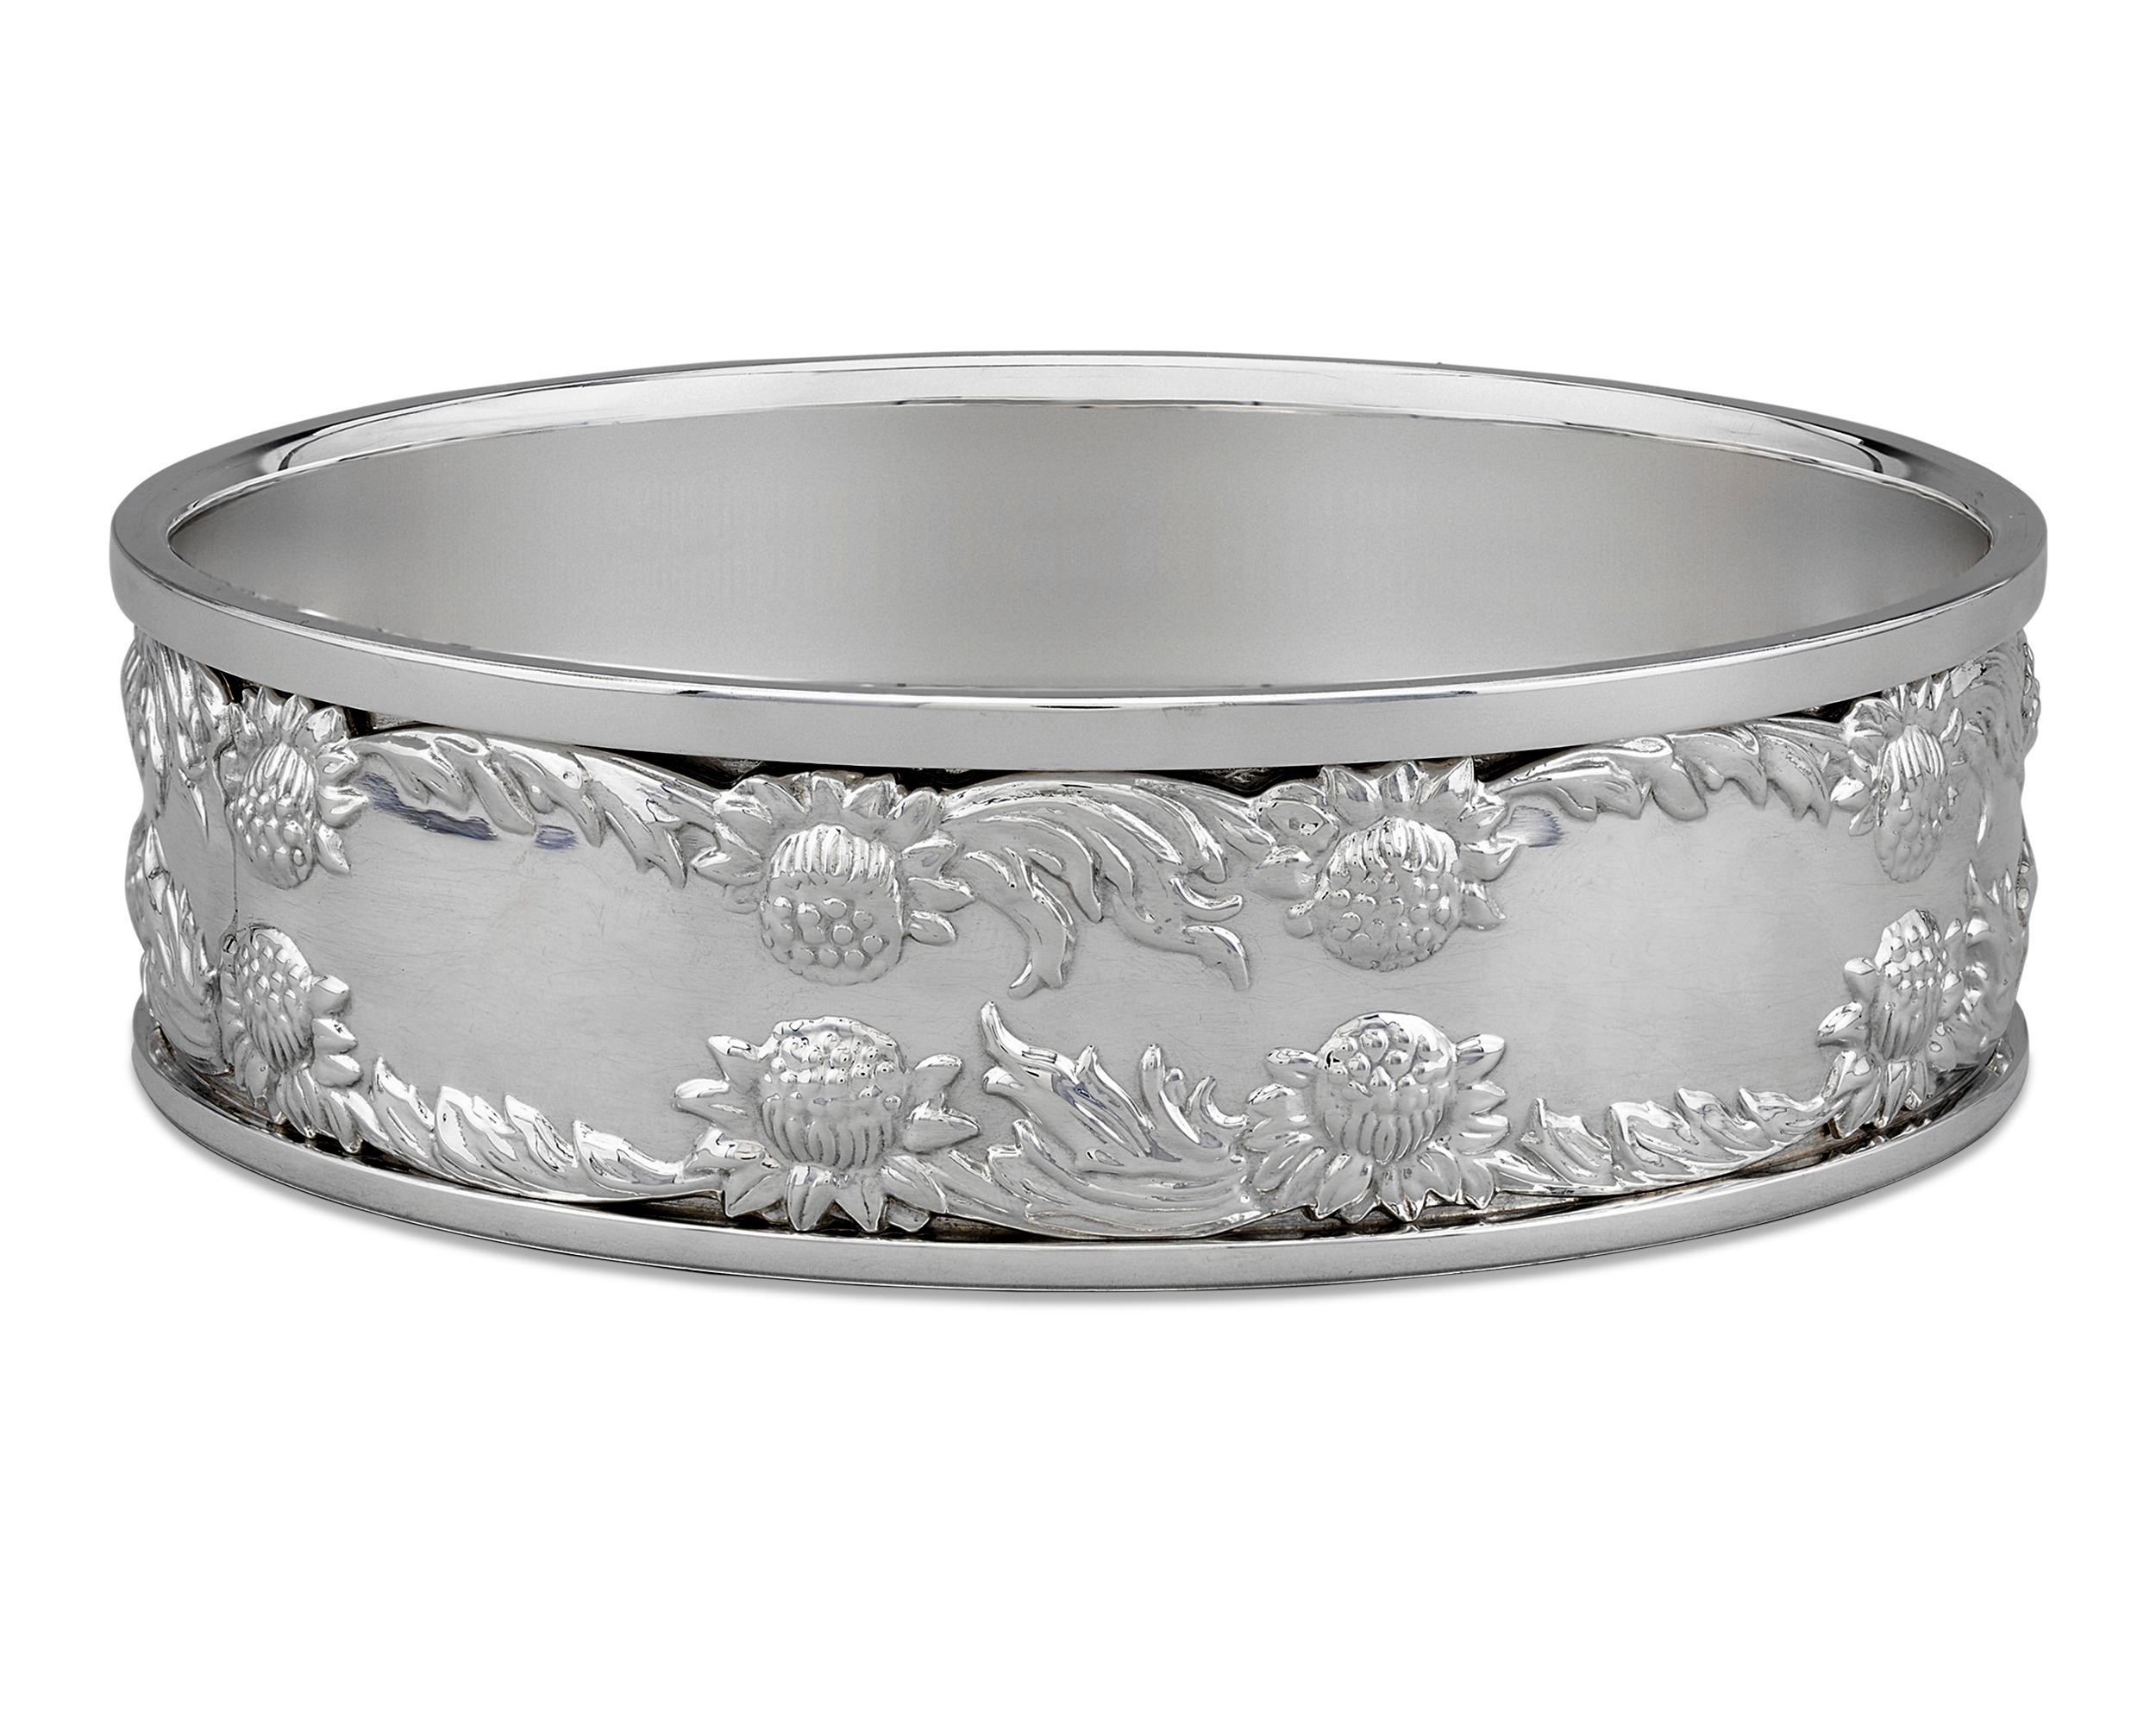 Large enough to fit a magnum-sized bottle of wine is this pair of exquisite sterling silver wine coasters by Tiffany & Co. Their elegant forms are adorned in the blooms of the Chrysanthemum pattern, perhaps Tiffany's most iconic and treasured silver